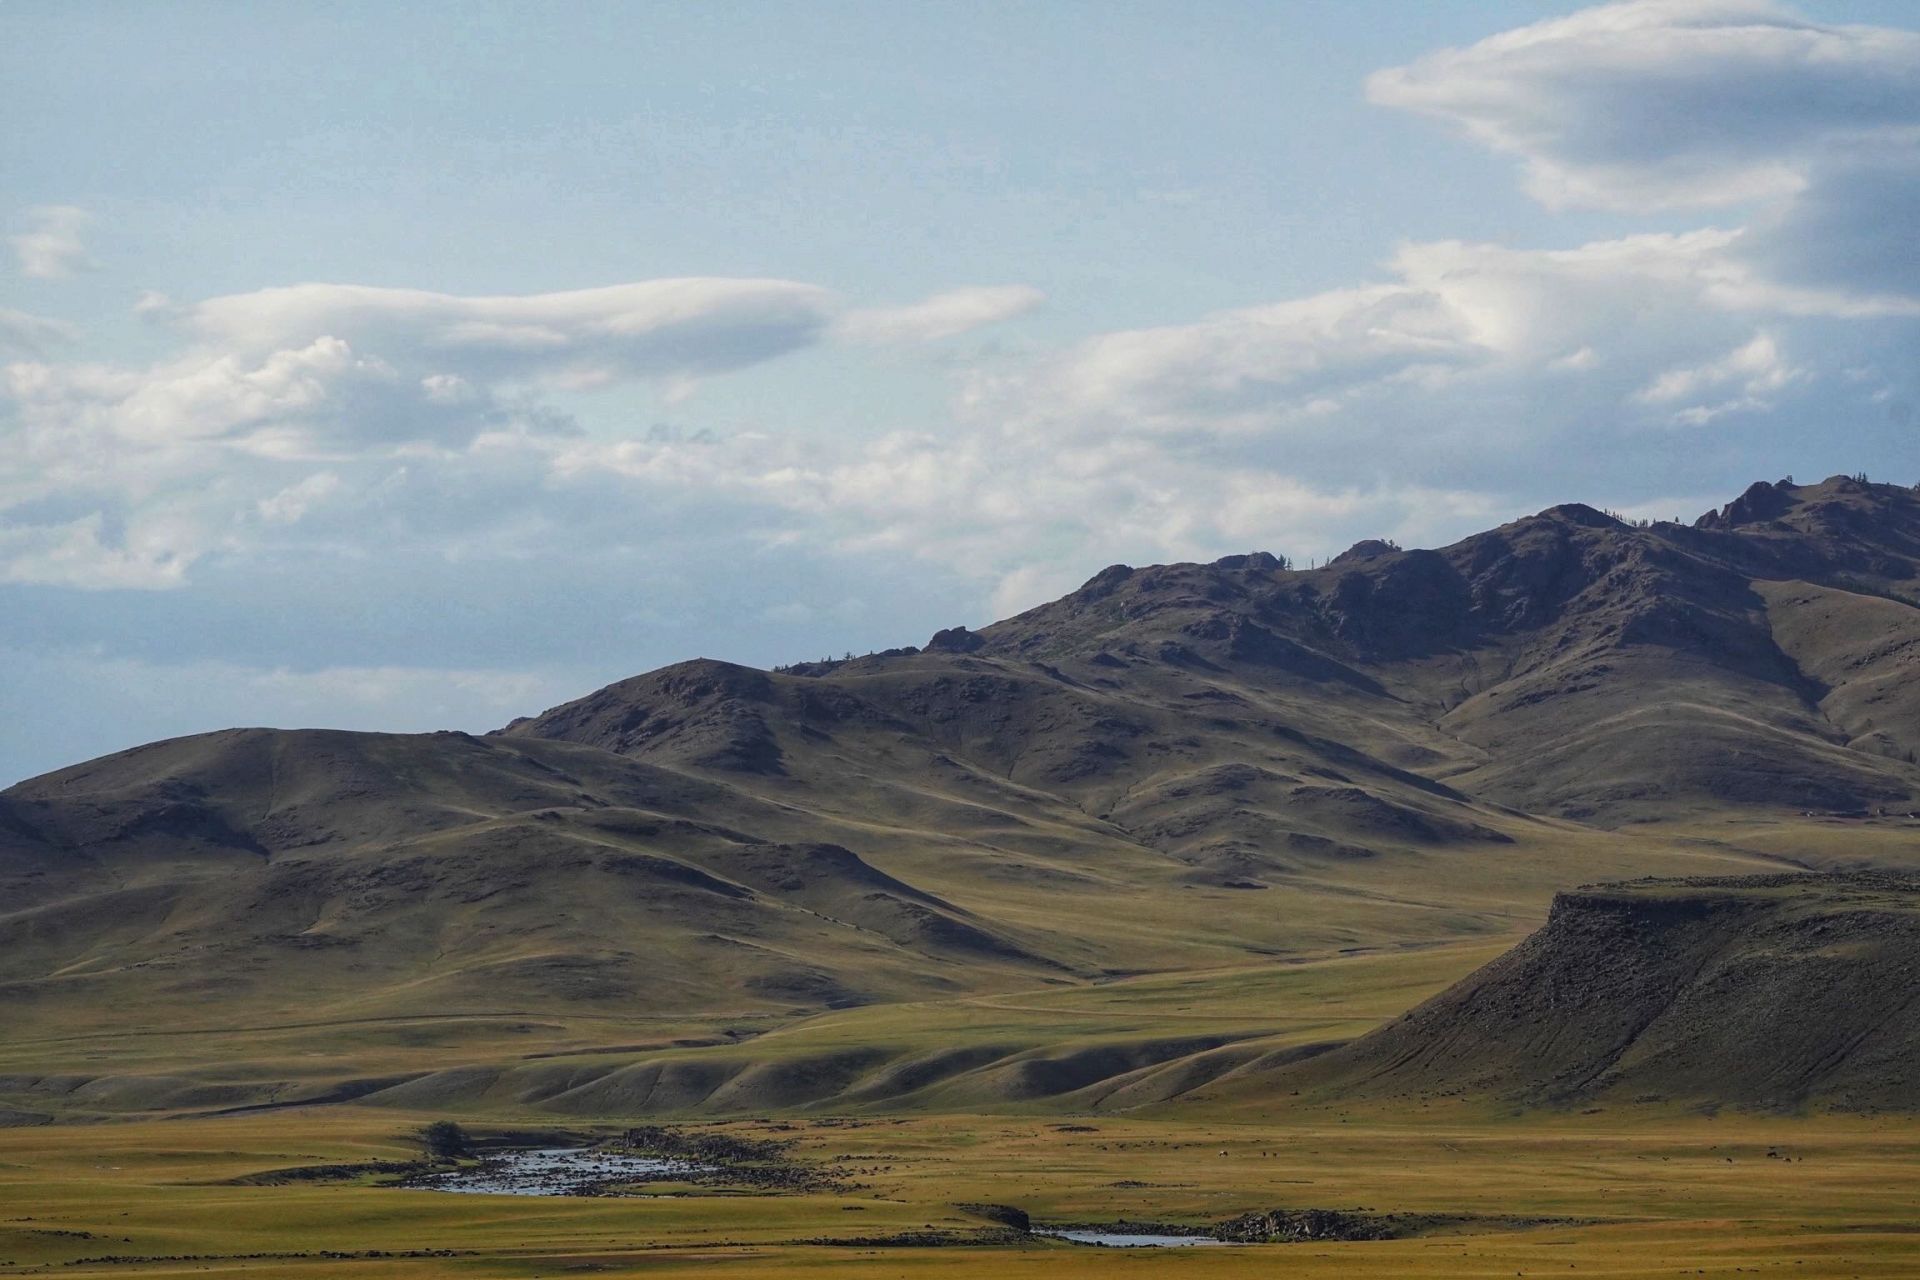 Central Mongolia has a beautiful open landscape and the Orkhon Valley National Park south of Karakorum is worth the adventure